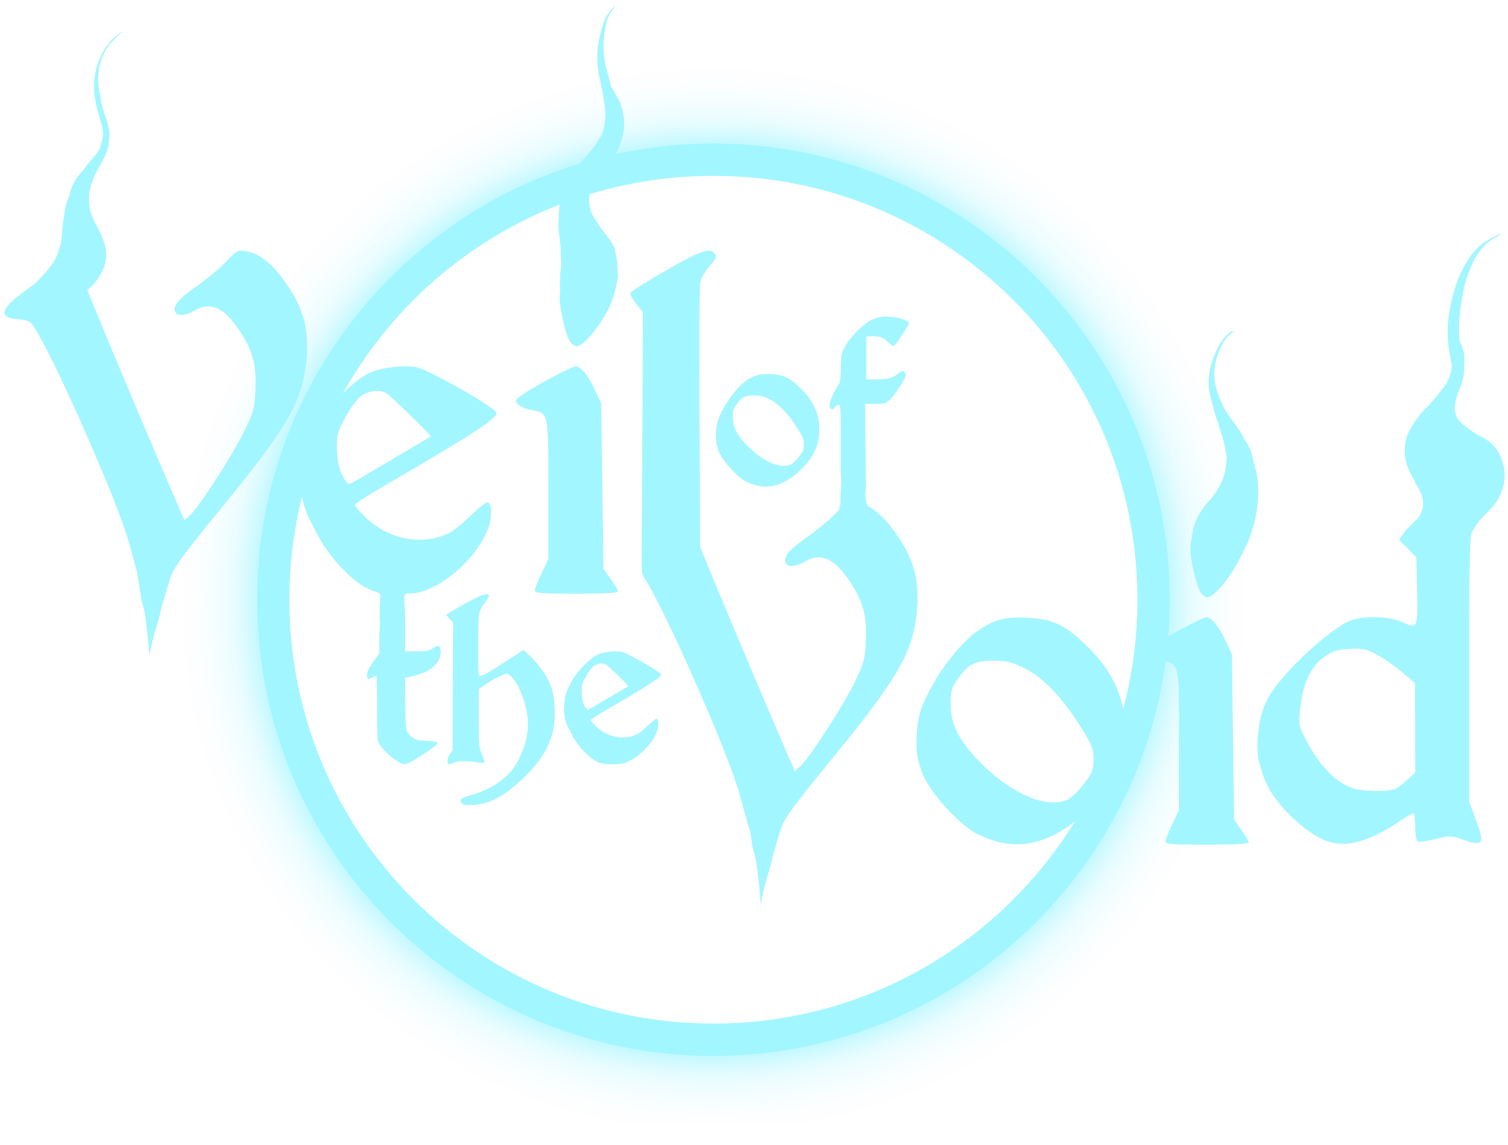 Veil of the Void Patches Home